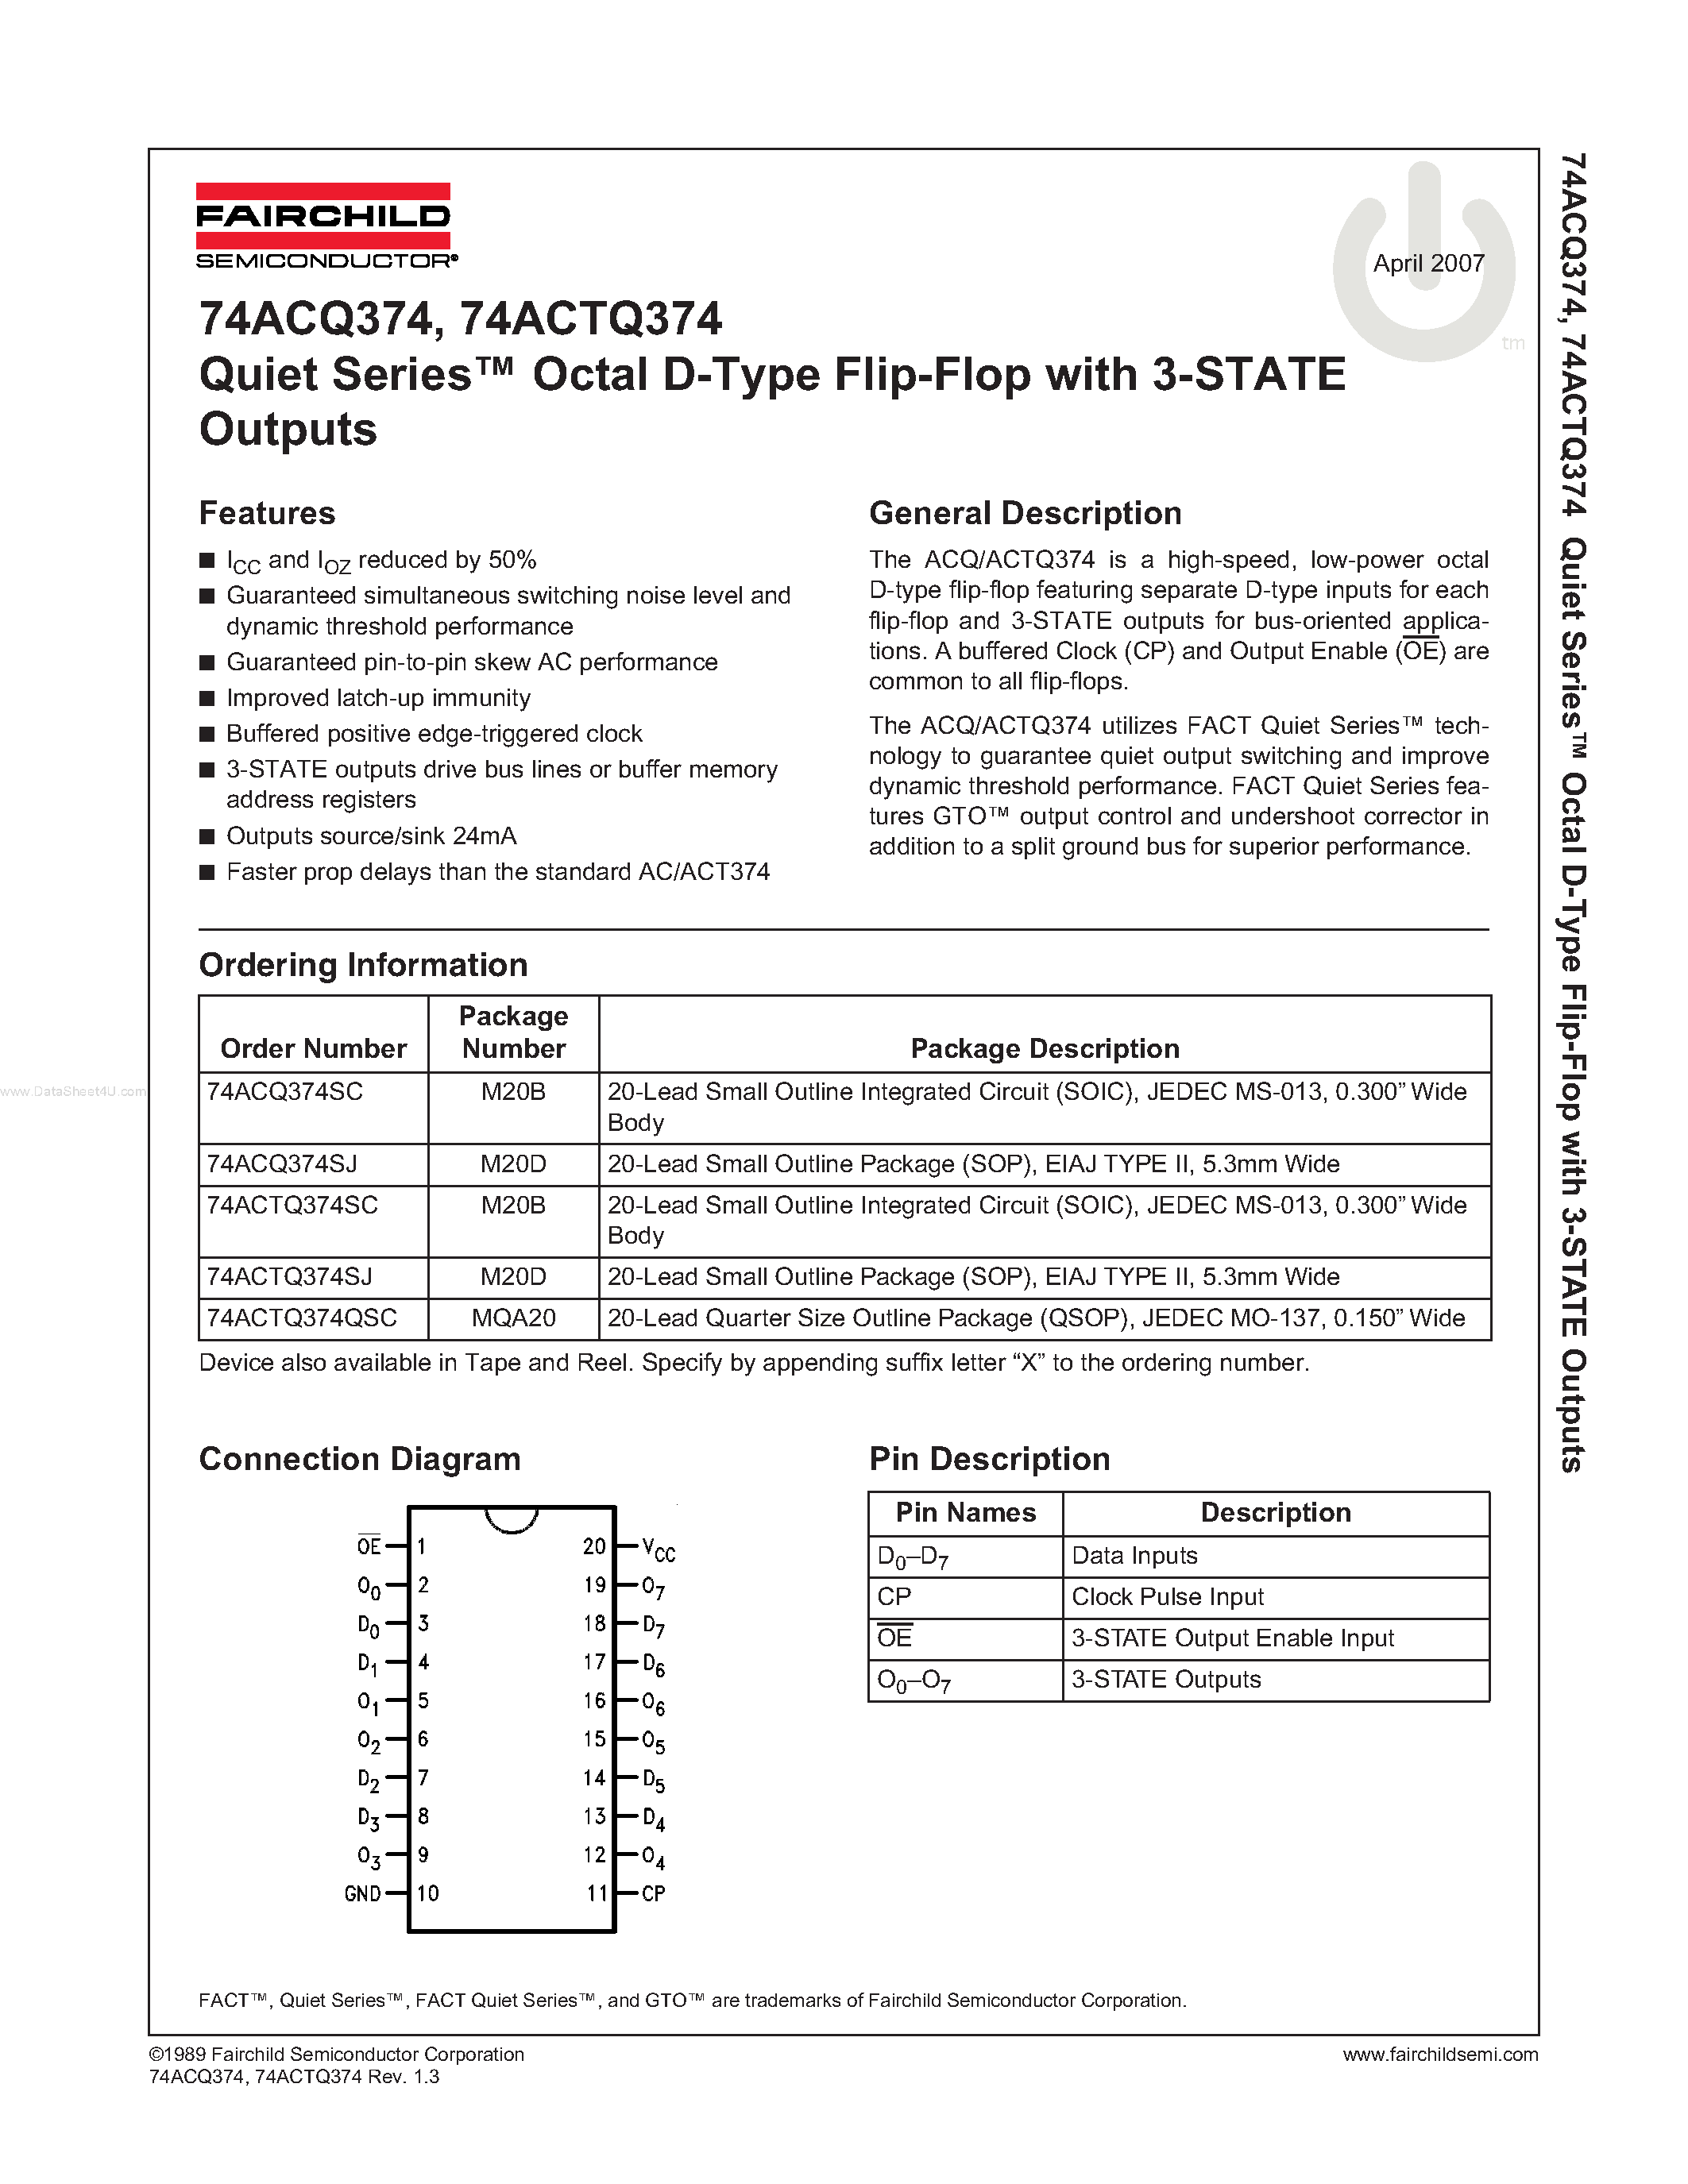 Datasheet 74ACQ374 - Quiet Series Octal D-Type Flip-Flop with 3-STATE Outputs page 1